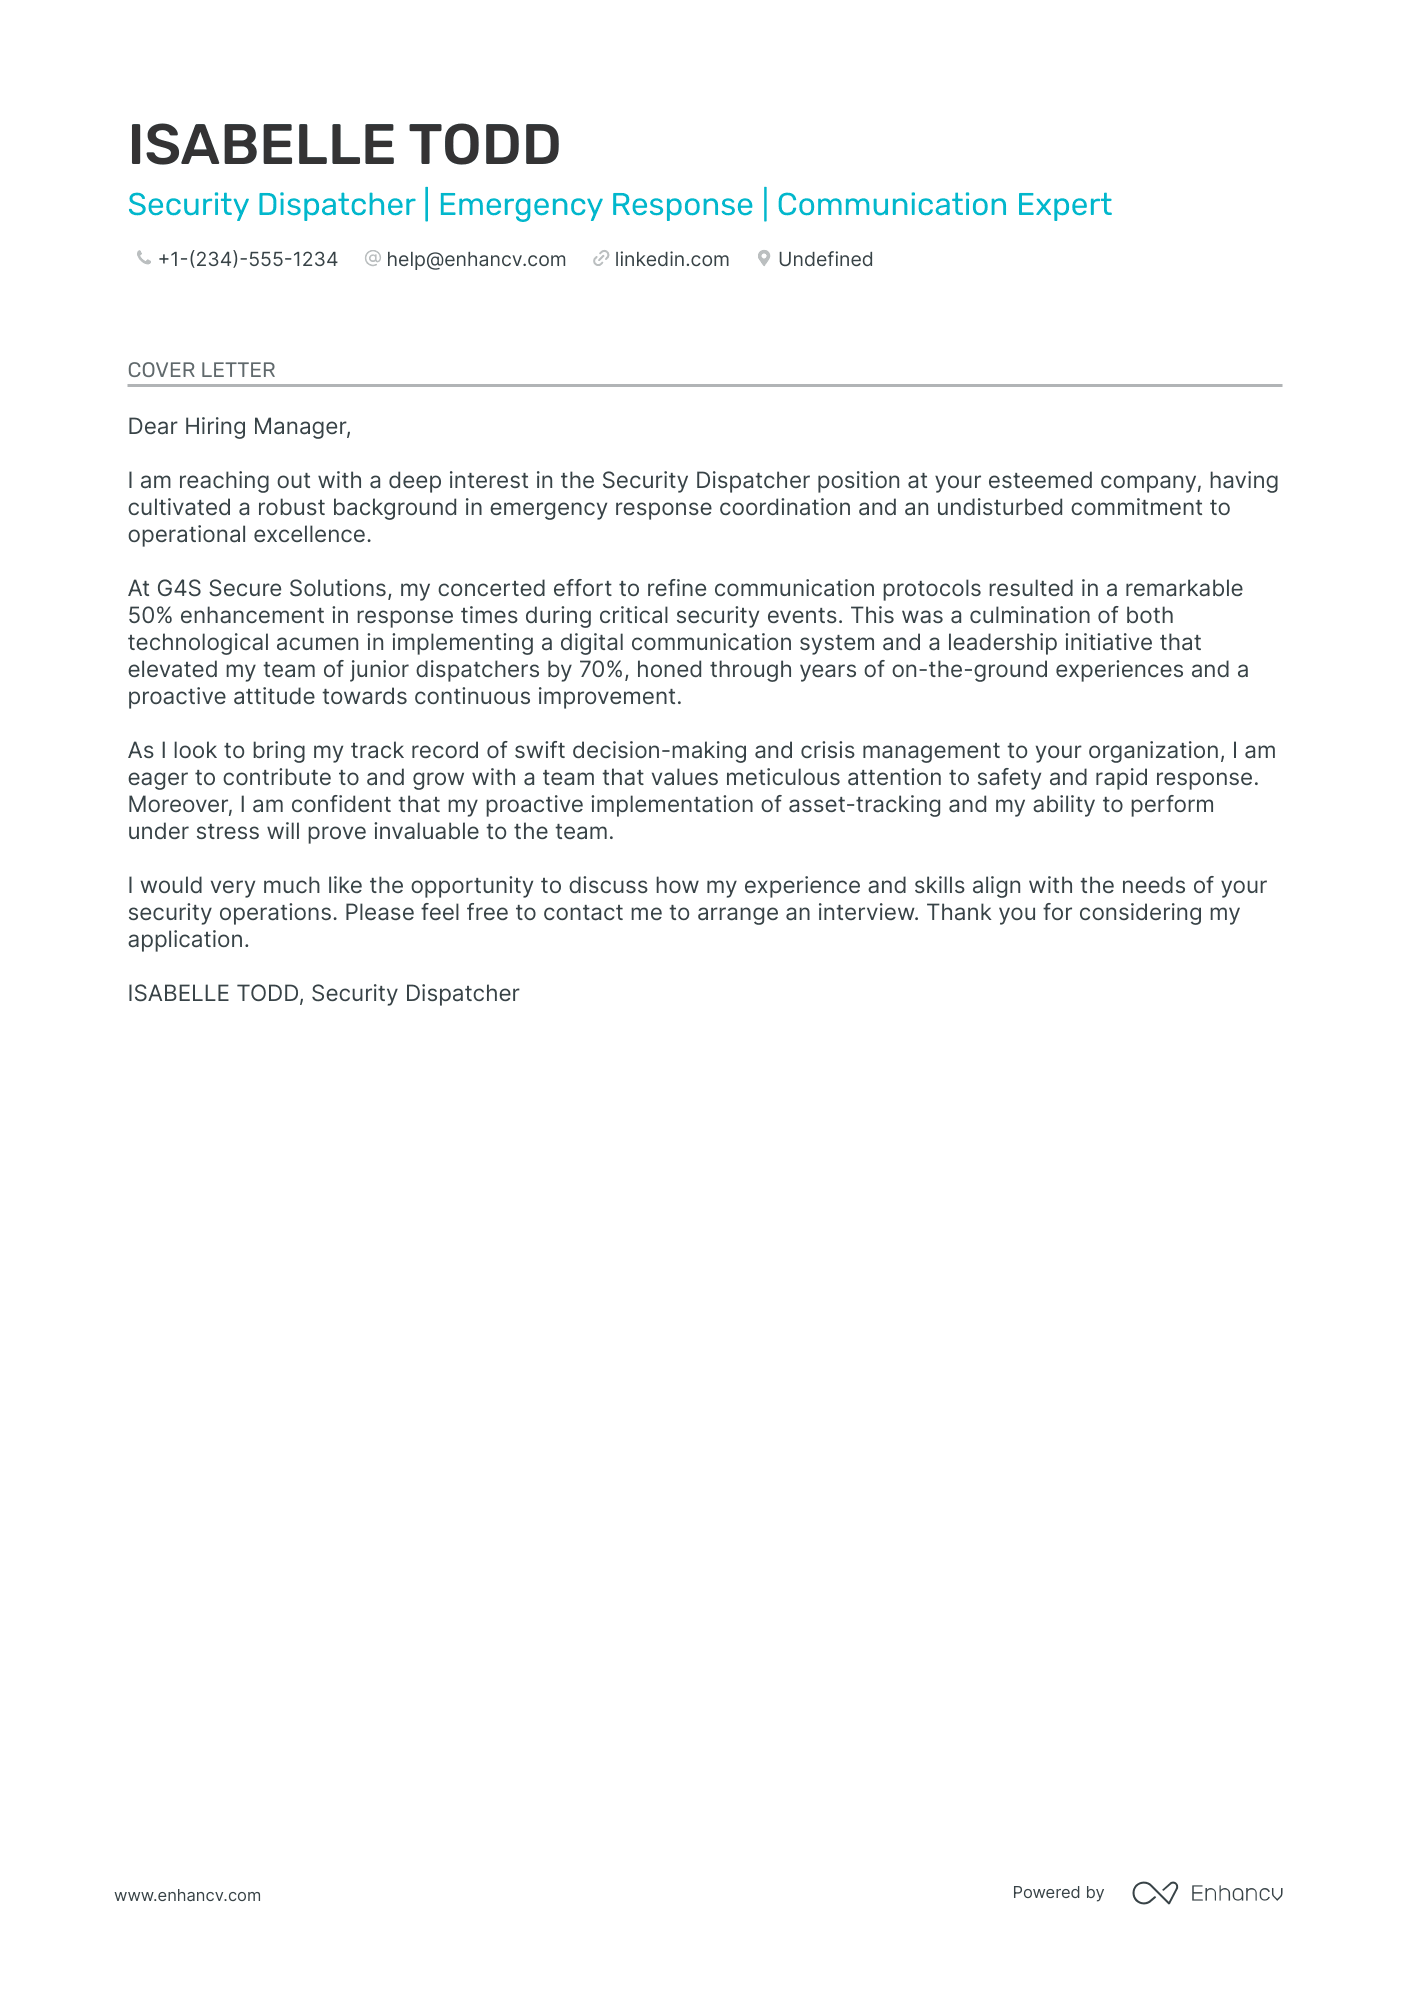 Security Dispatcher cover letter